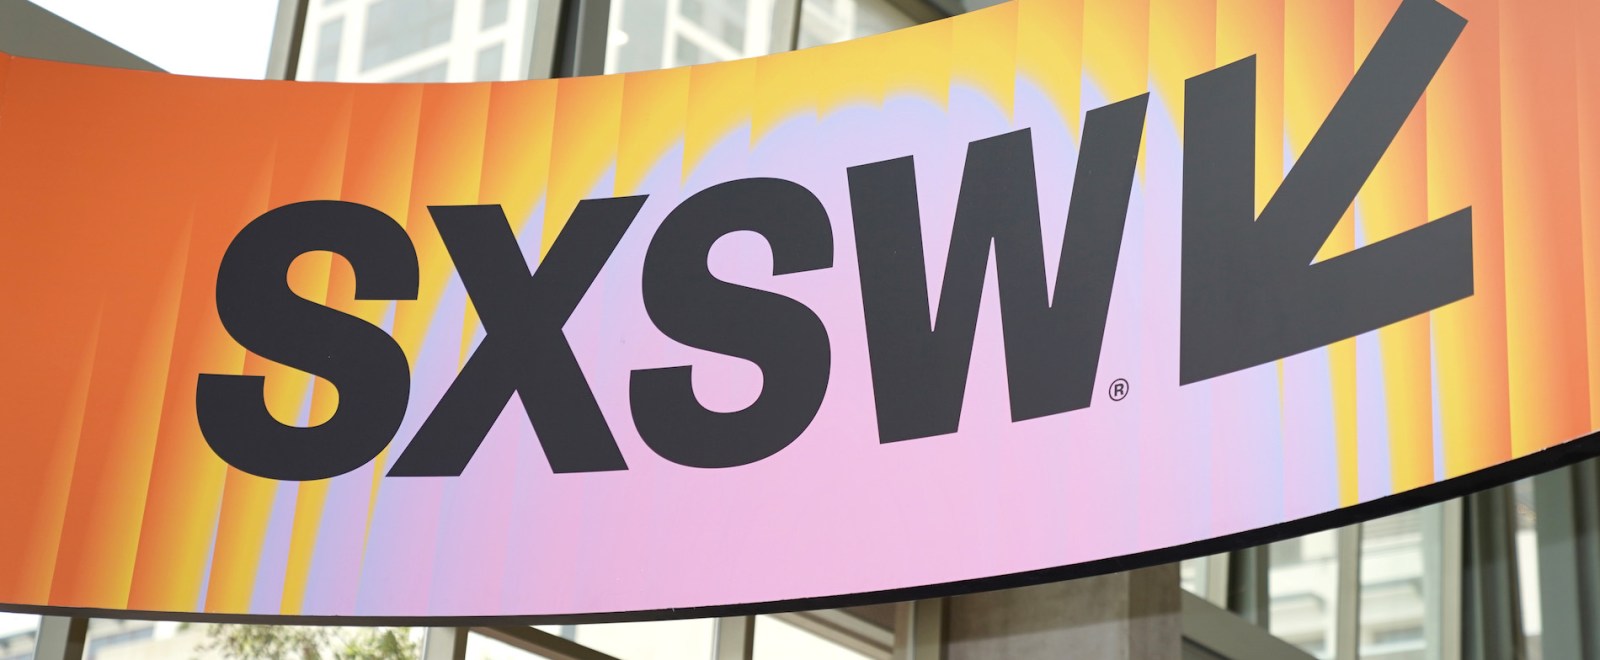 SXSW South By Southwest sign